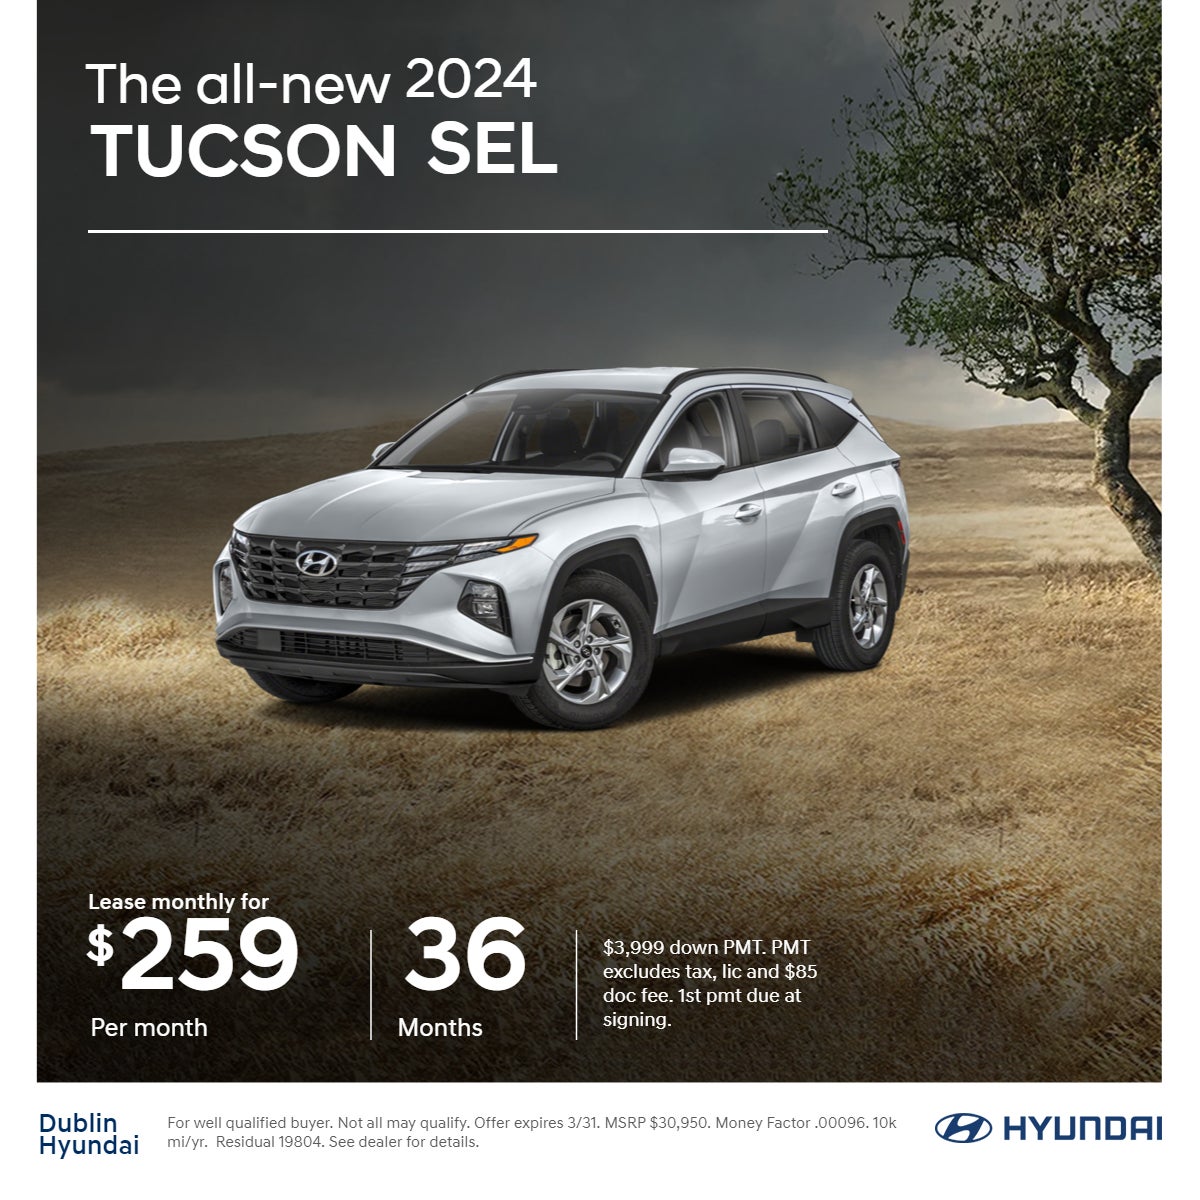 lease a Tucson for 299 per month